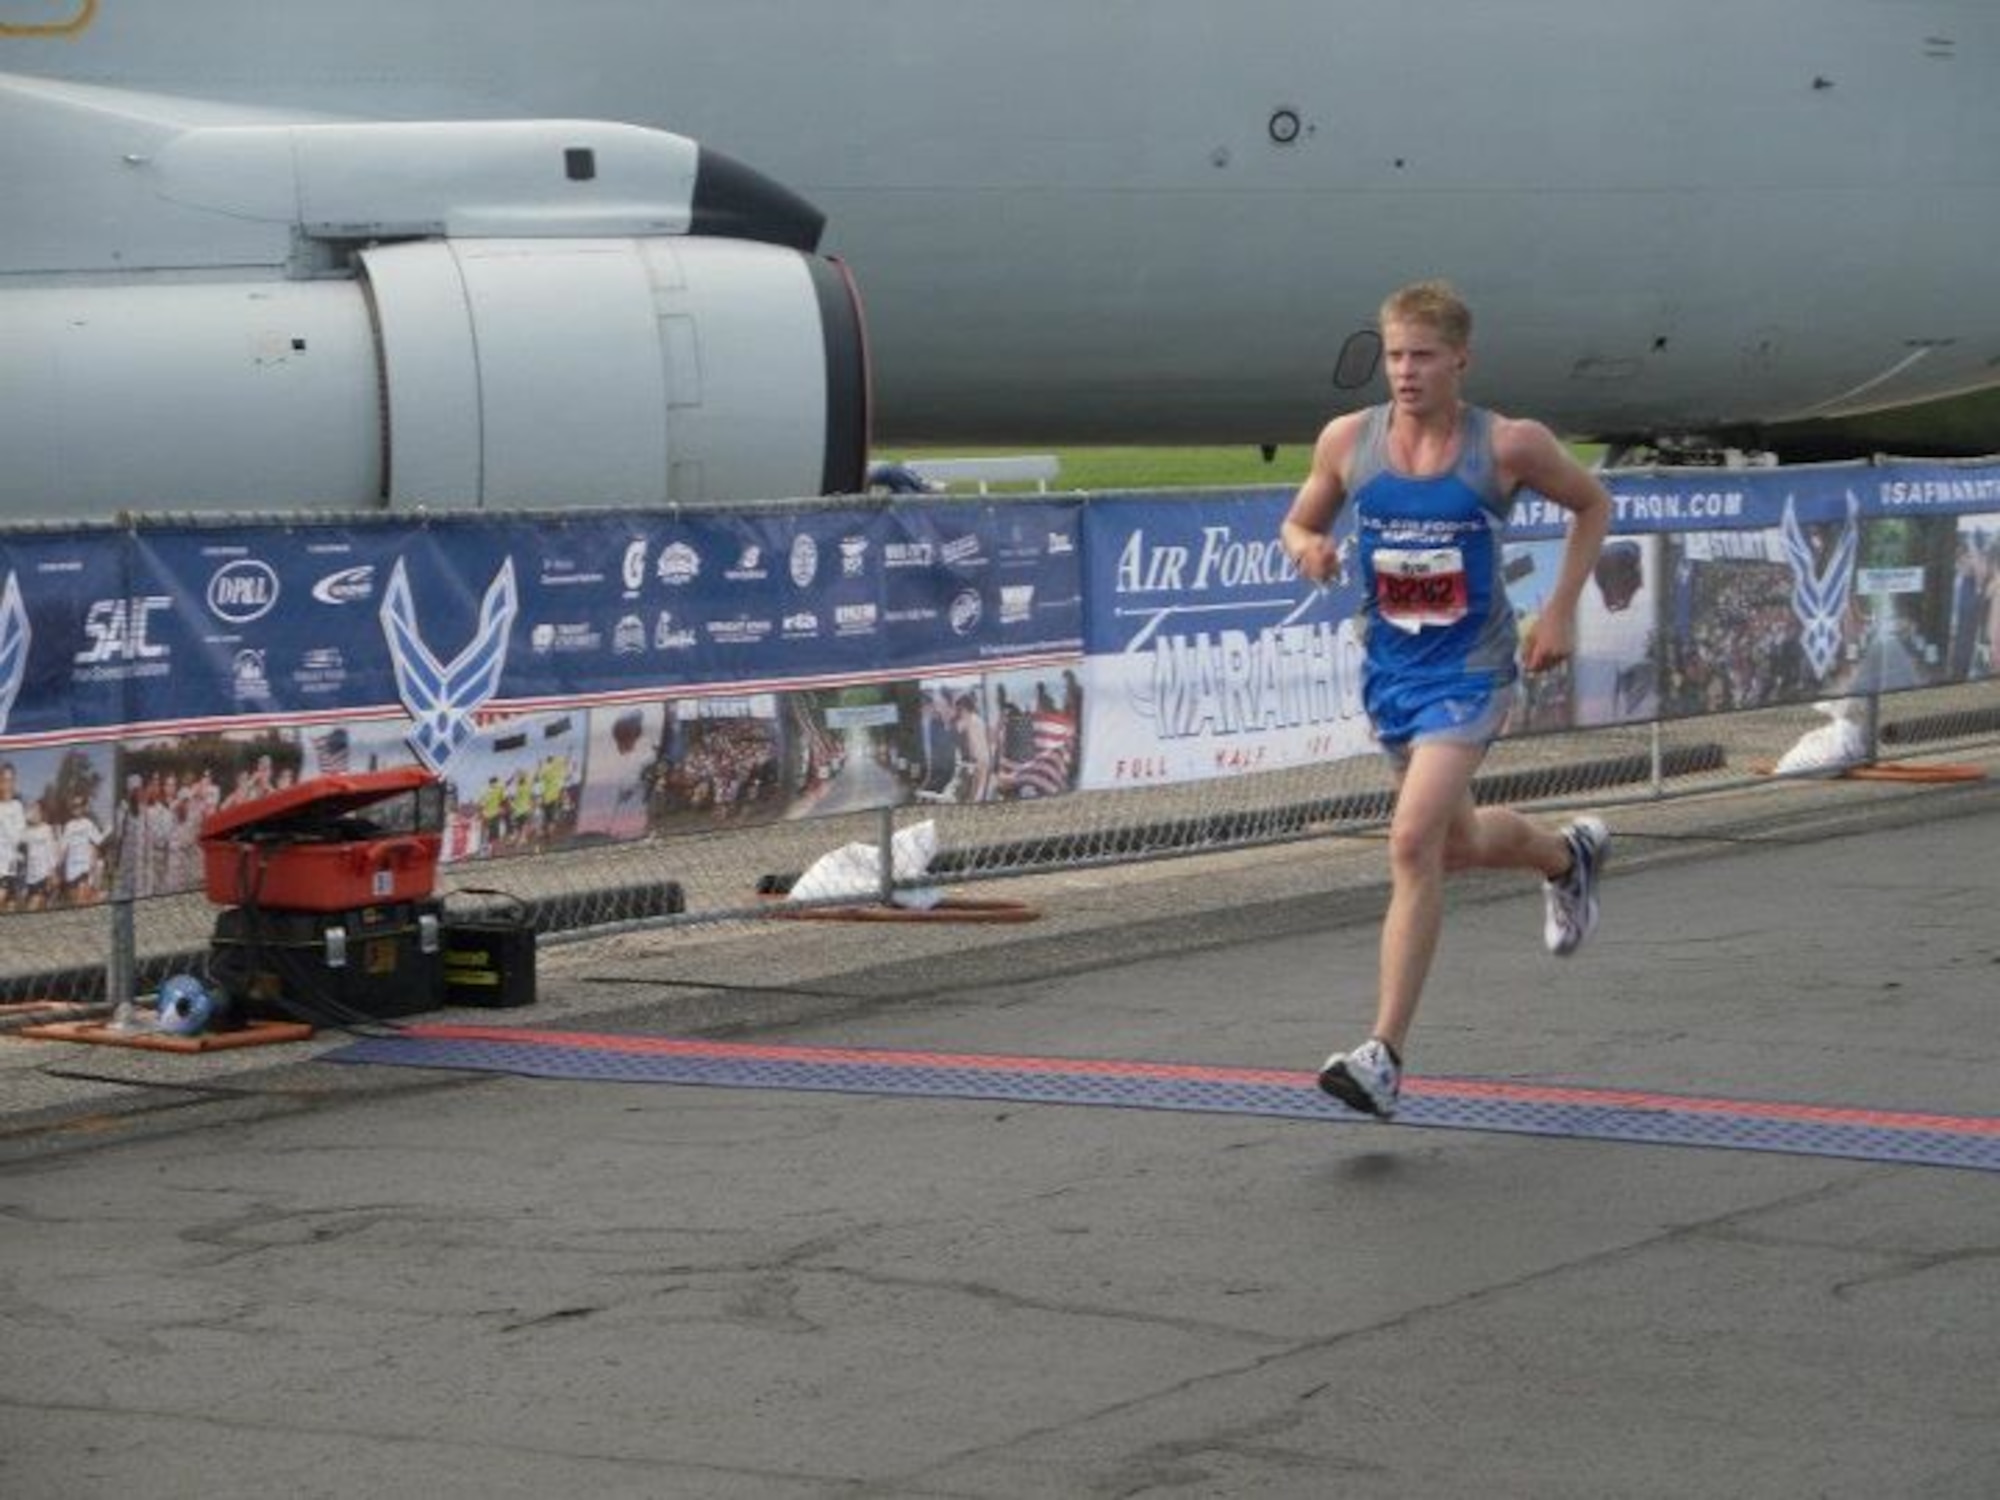 WRIGHT- PATTERSON AIR FORCE BASE, Ohio -- Airman 1st Class Ryan Jelstrom, U.S. Air Forces in Europe running team member, crosses the finish line at the U.S. Air Force Marathon’s half marathon Sept. 17 at Wright – Patterson Air Force Base, Ohio with a time of 01:28:00. Jelstrom is a flight equipment maintainer with the 480th Fighter Squadron in Spangdahlem AB, Germany. He was recruited for the team after placing 3rd in the USAFE half marathon at Spangdahlem AB .  (U. S. Air Force courtesy photo)